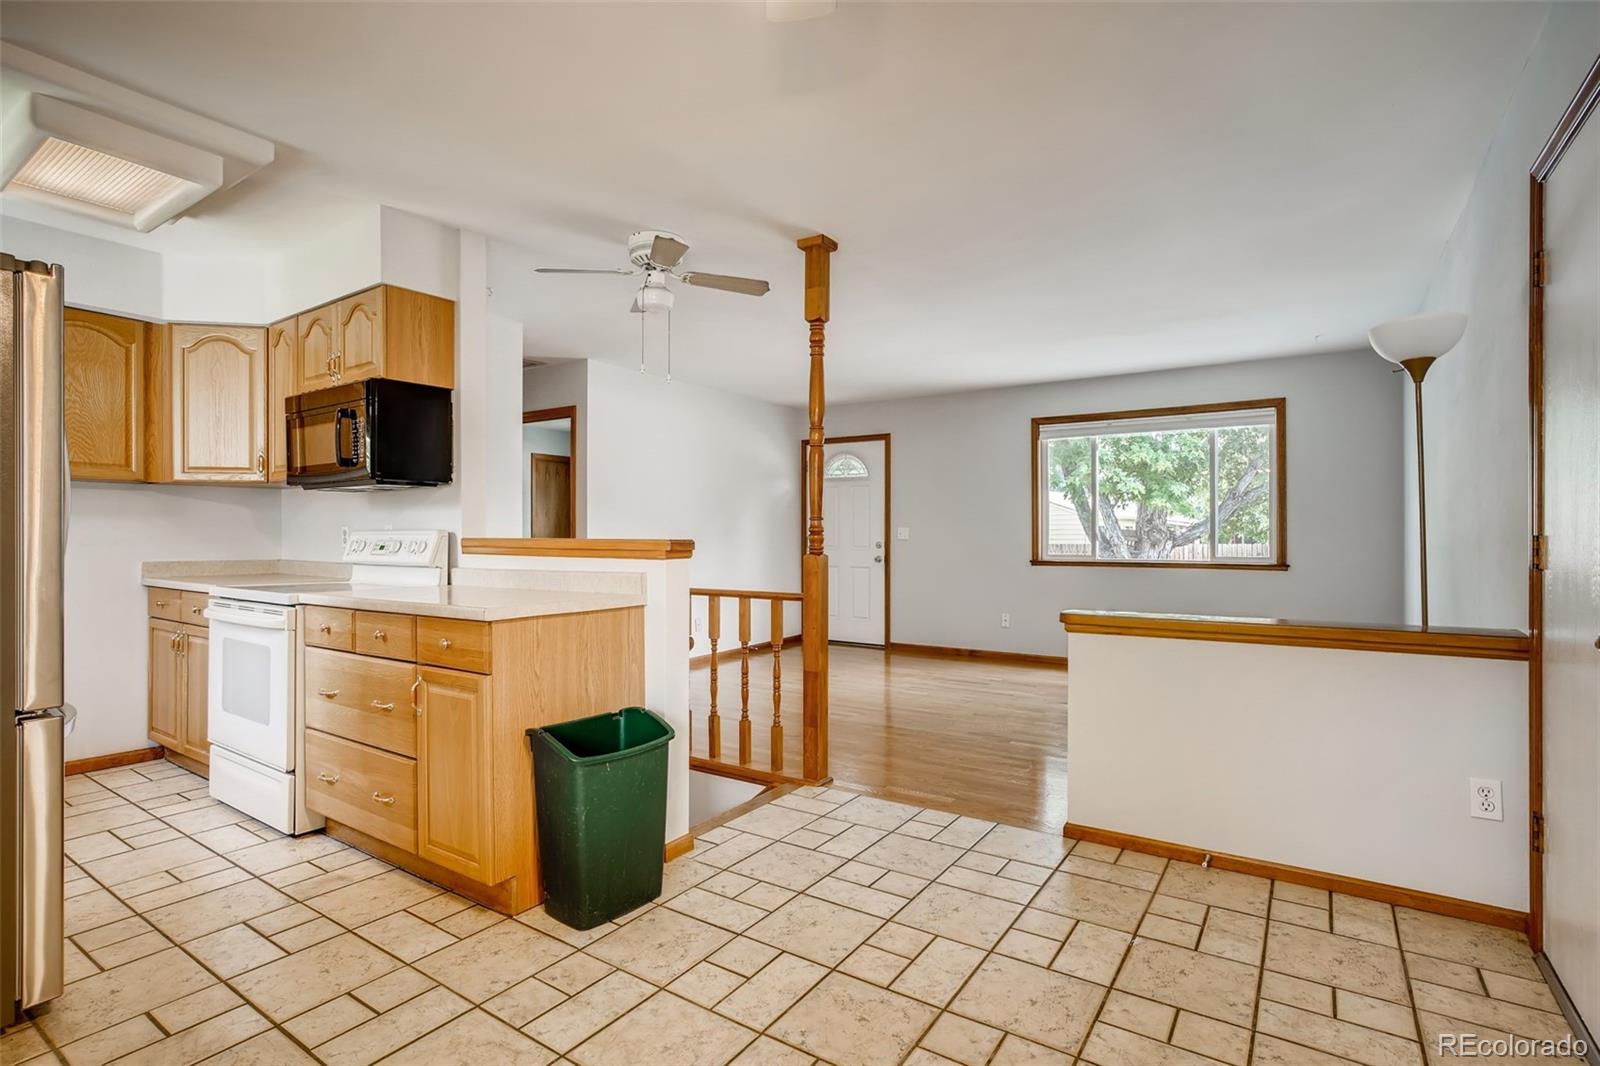 10757 107th, Westminster, CO